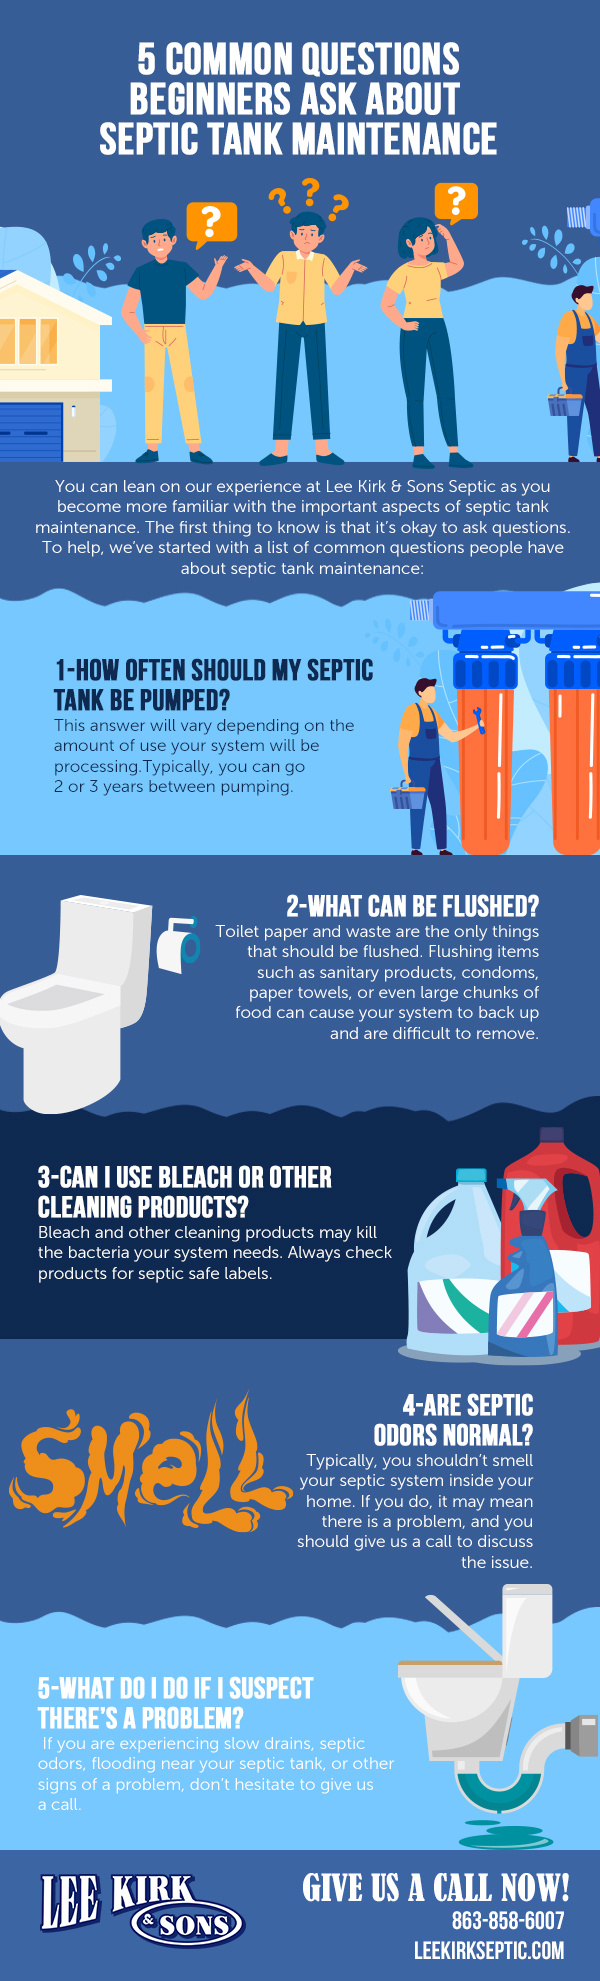 5 Common Questions Beginners Ask About Septic Tank Maintenance [infographic]